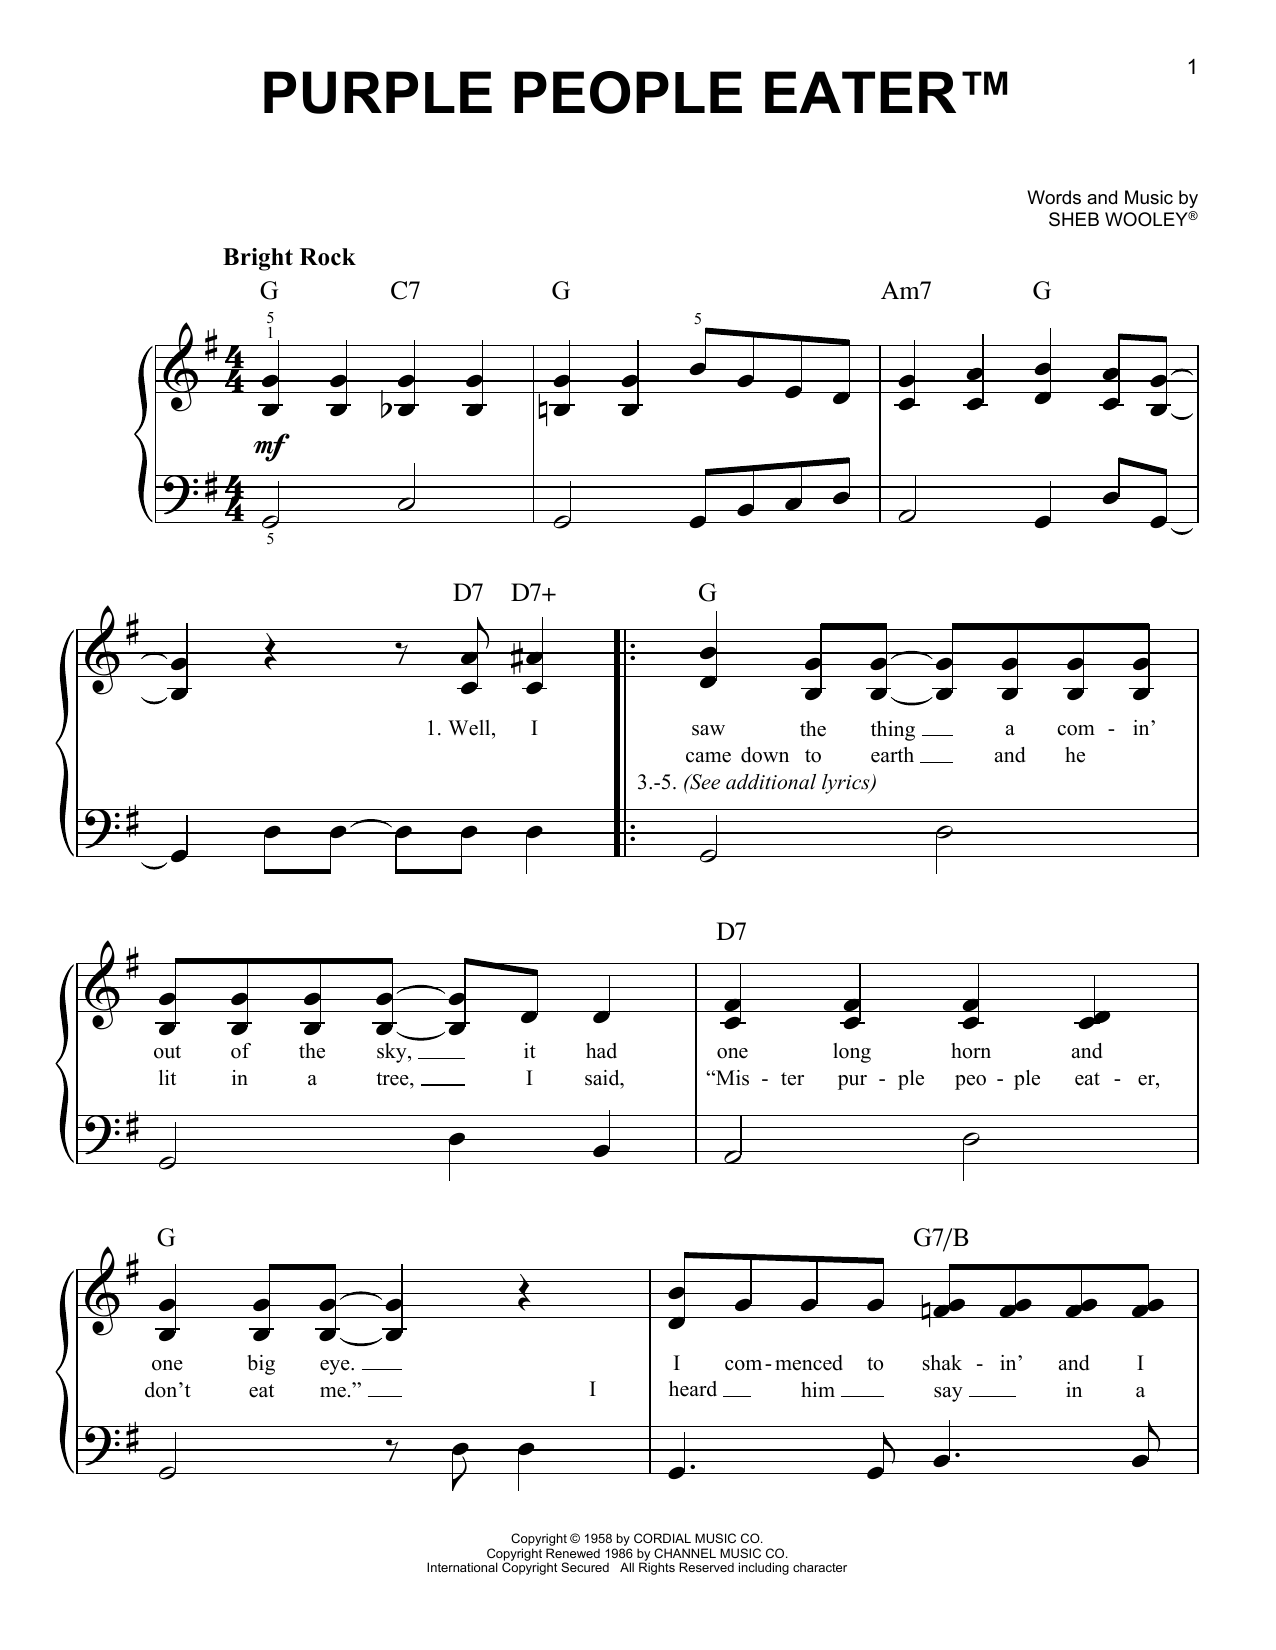 Download Sheb Wooley Purple People Eater Sheet Music